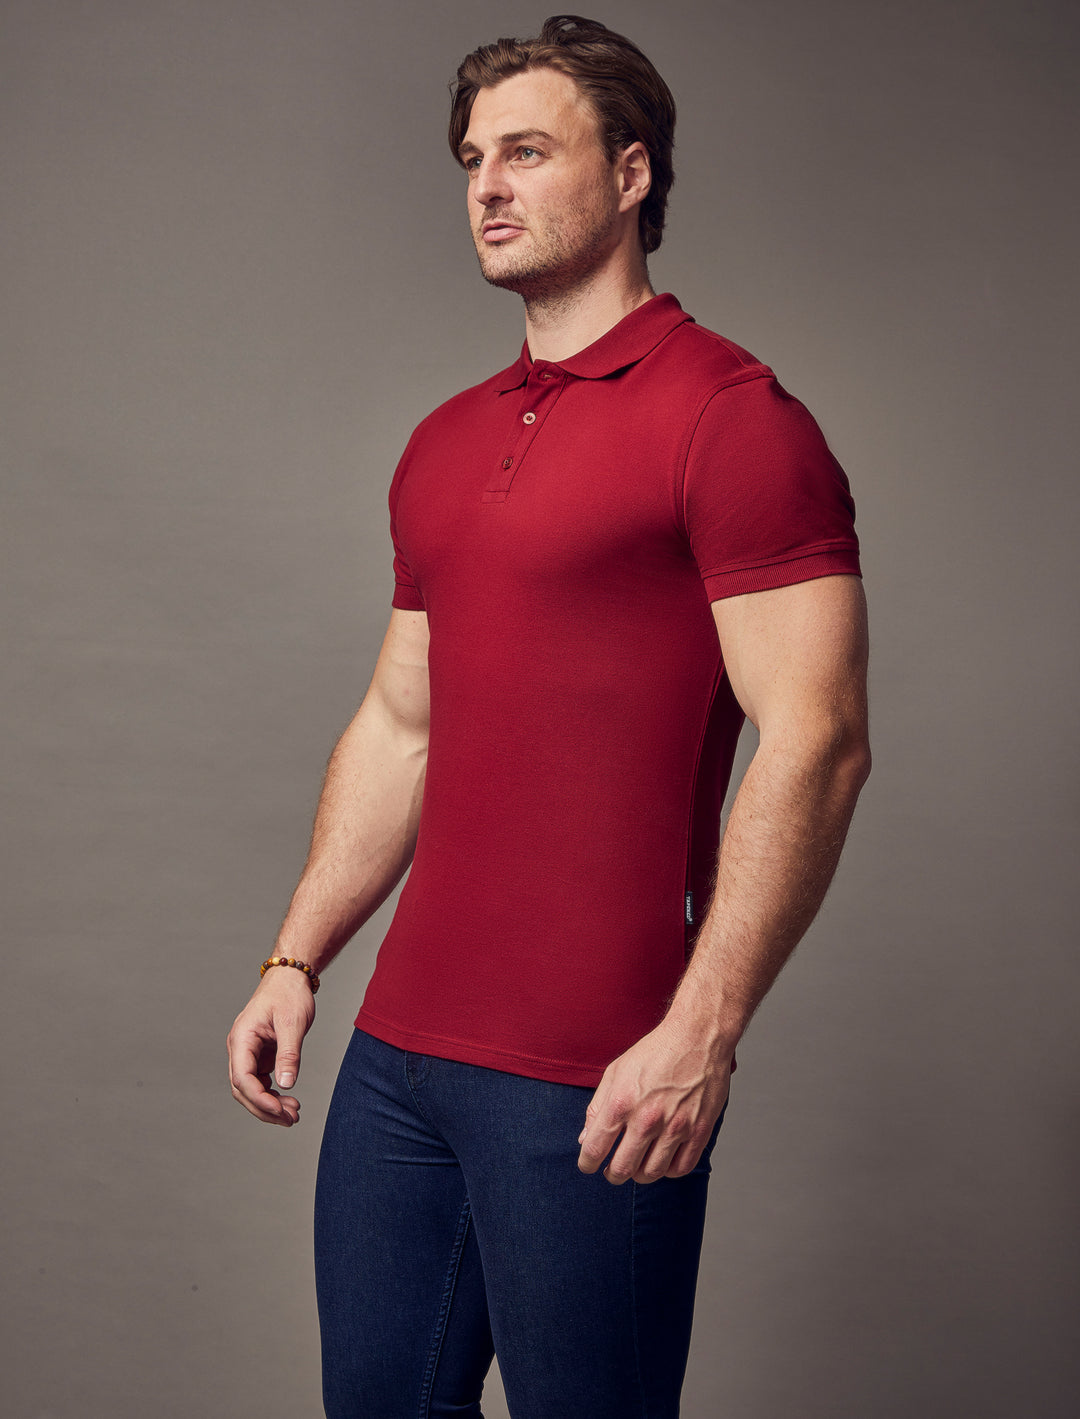 A burgundy, muscle-fit polo shirt with short sleeves, designed by Tapered Menswear, highlighting its well-crafted, tapered silhouette.